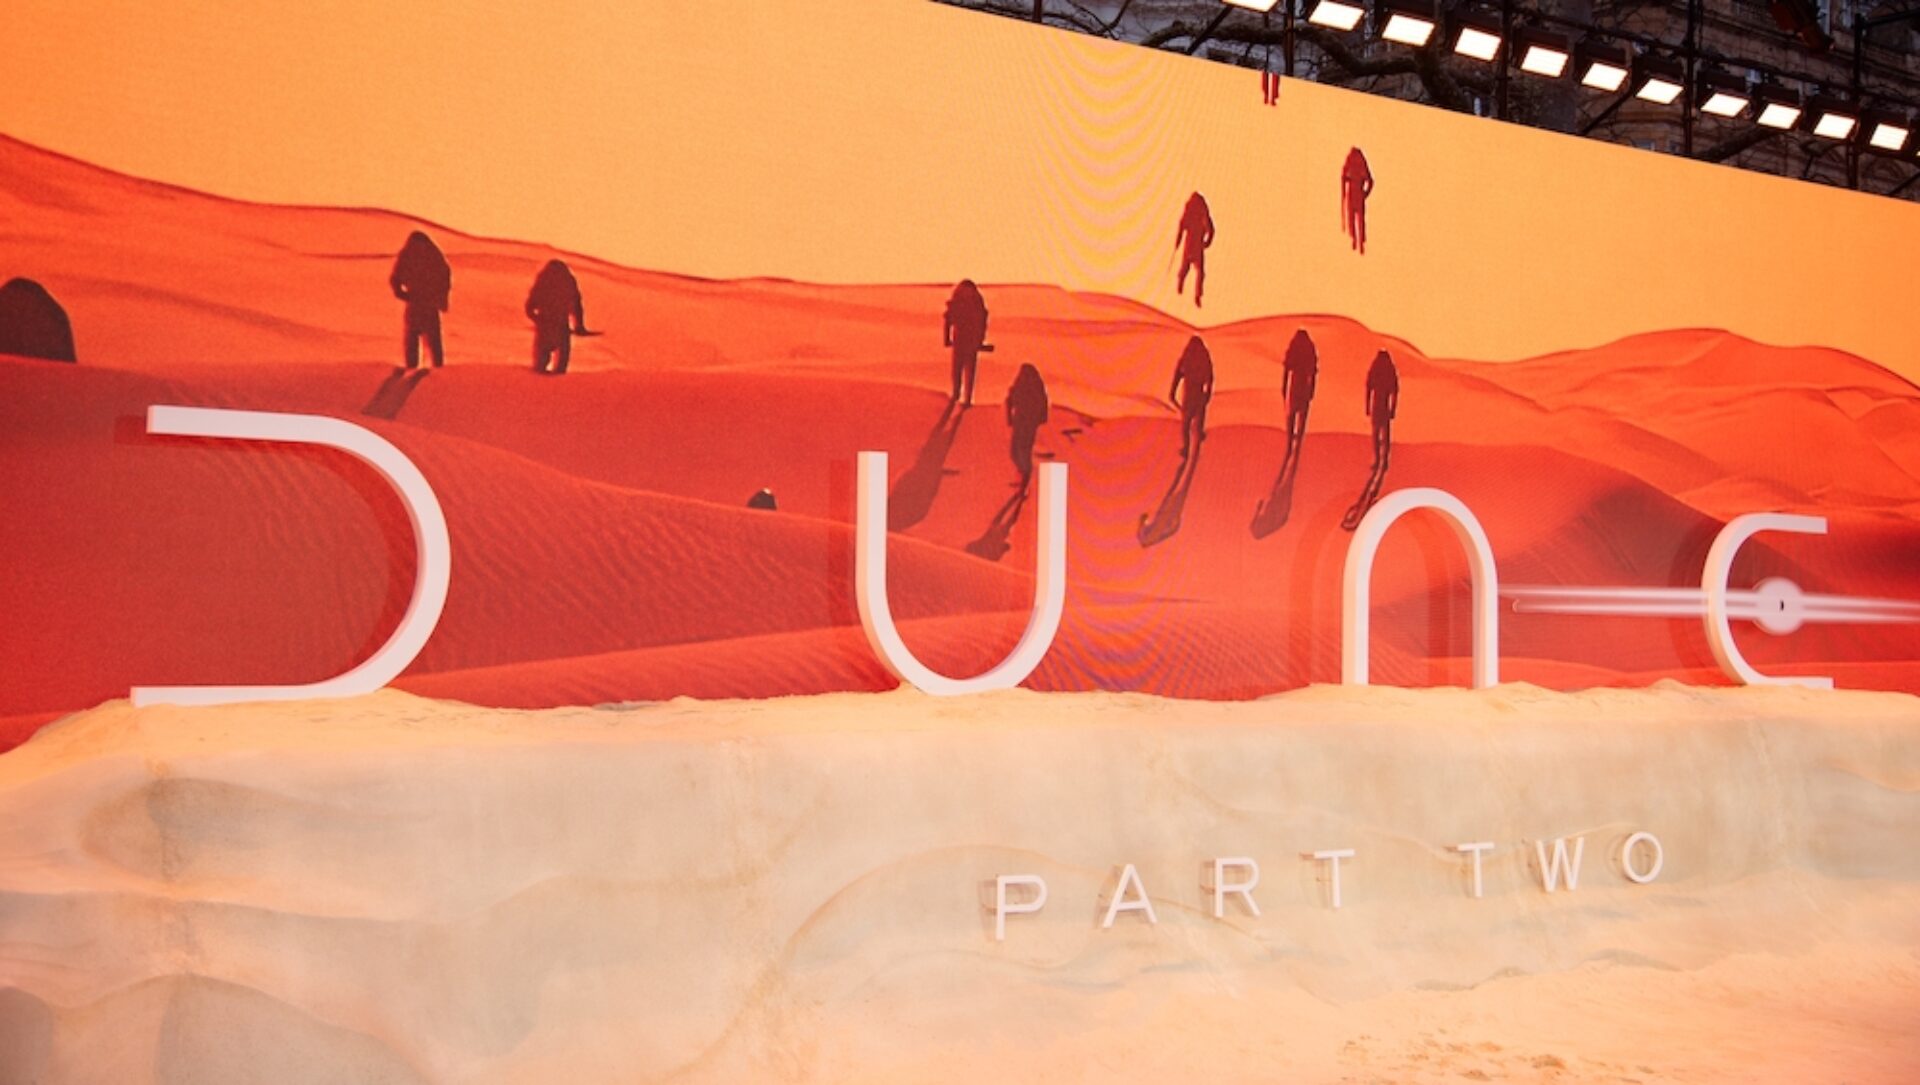 The epic sequel to the science fiction hit comes nearly three years after the first Dune, amassing almost $180 million worldwide in its opening weekend.